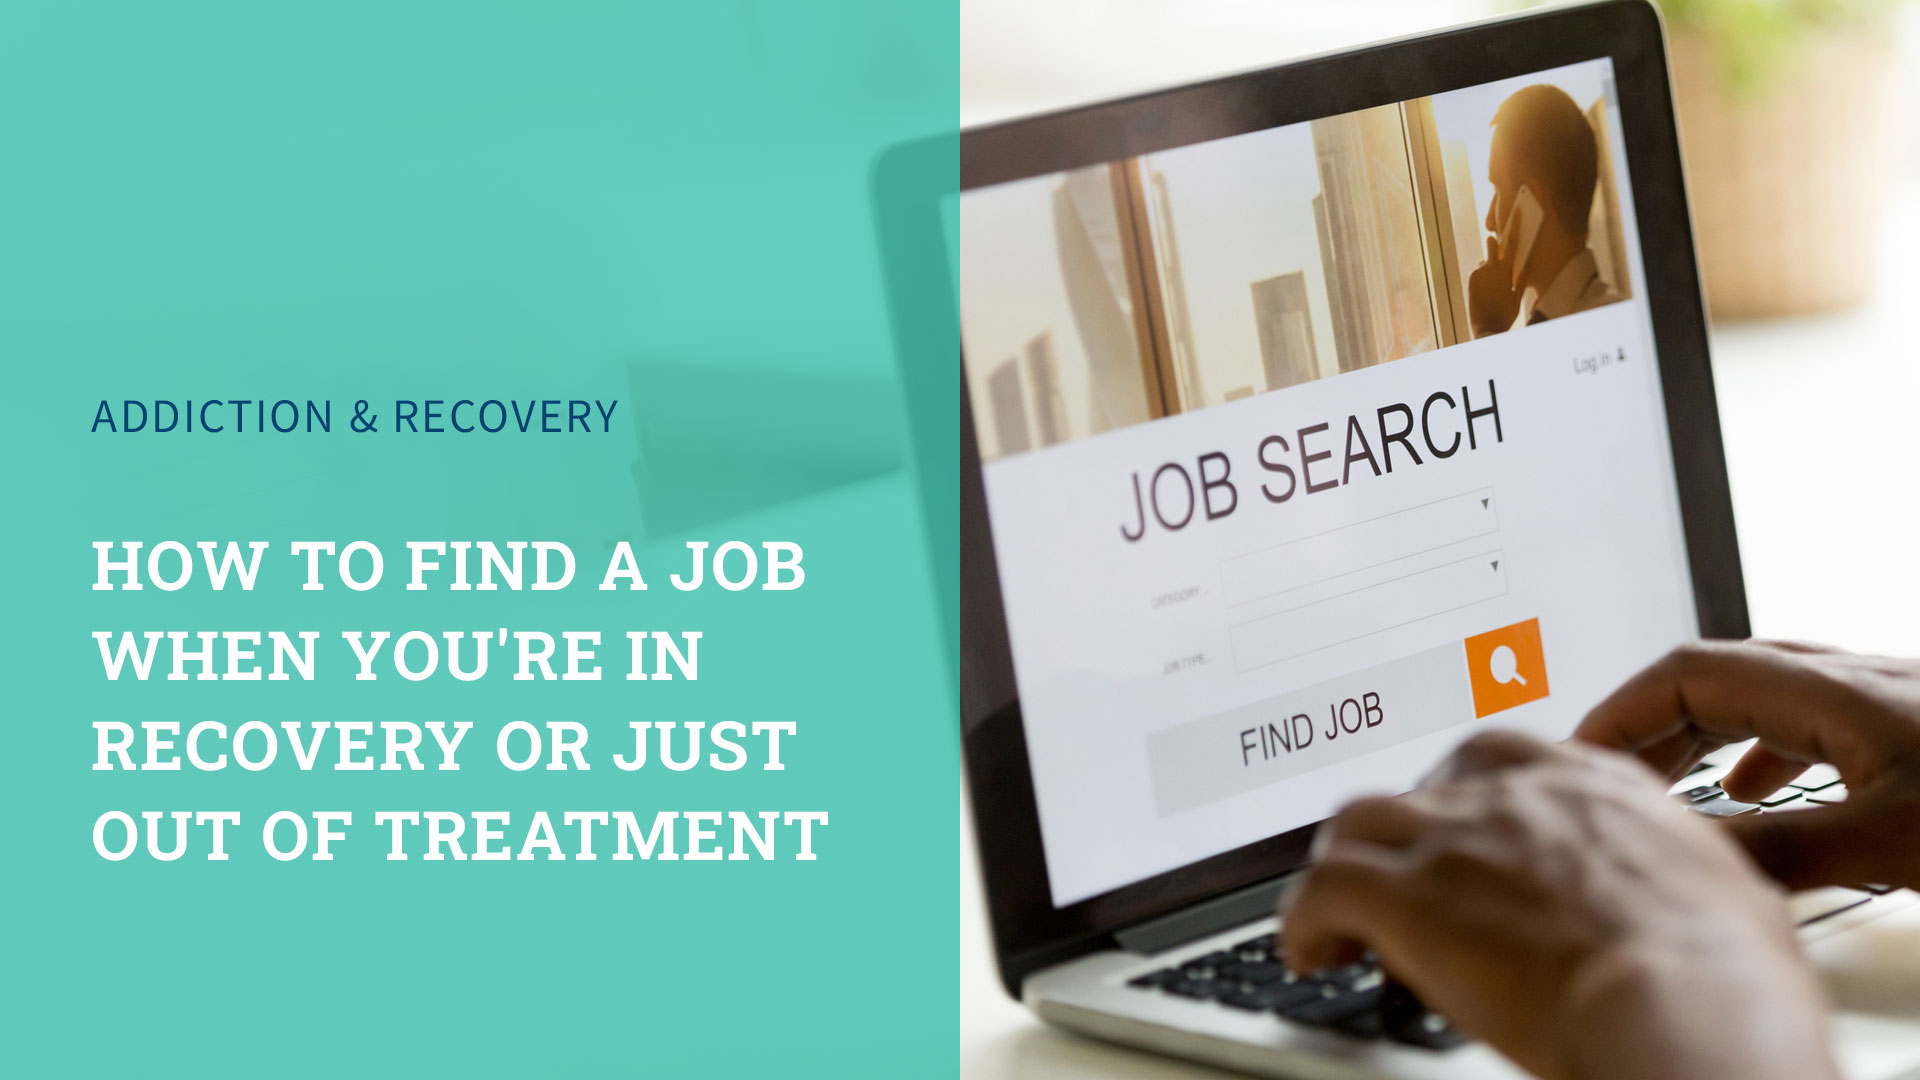 How to Find a Job When You’re in Recovery or Just Out of Treatment